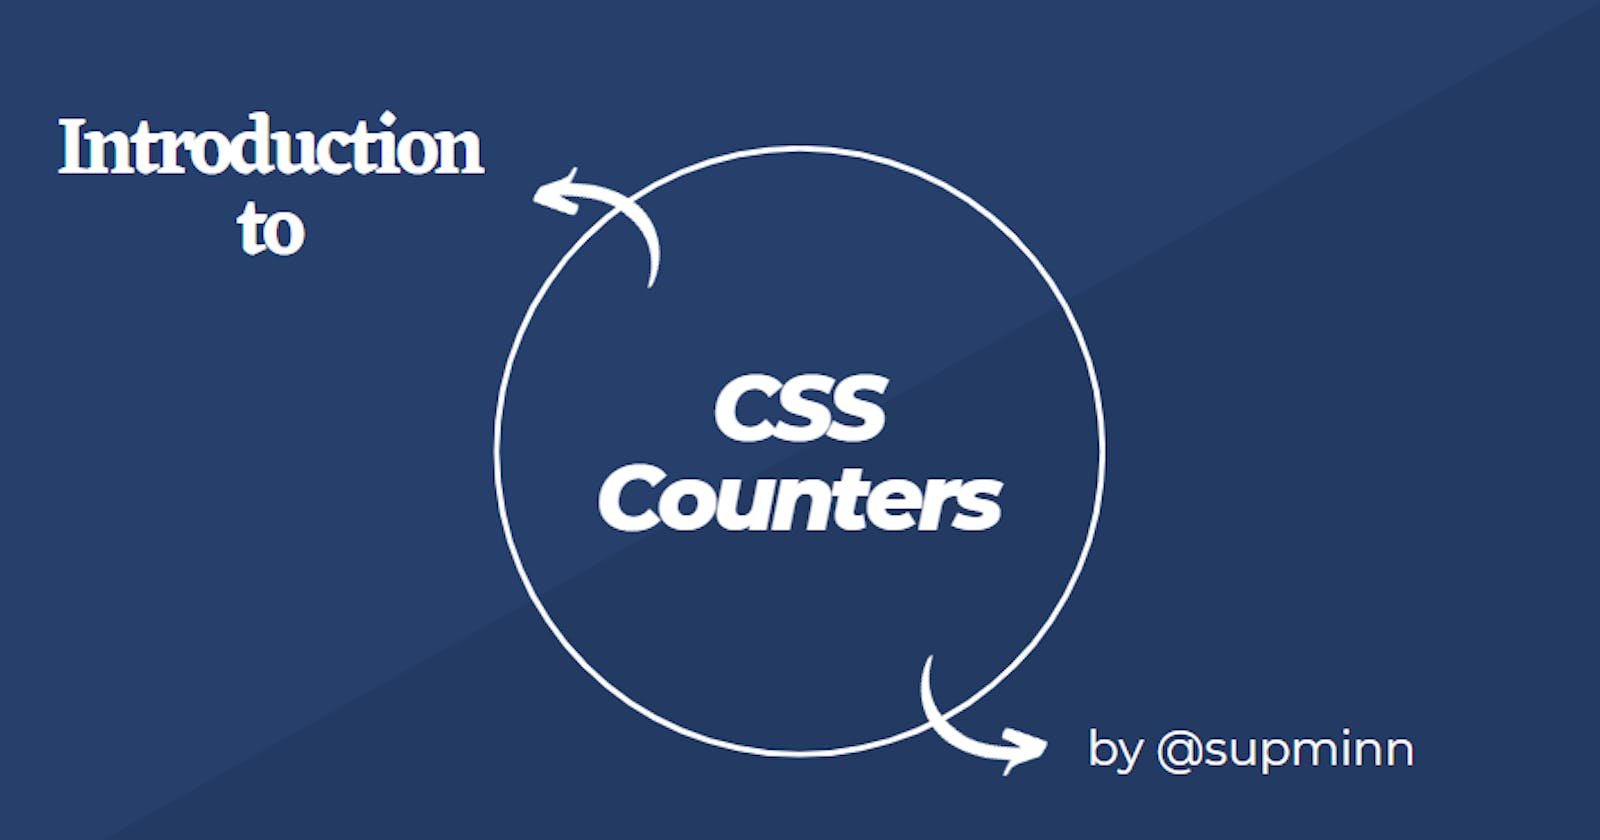 Simplify your lists using CSS Counter